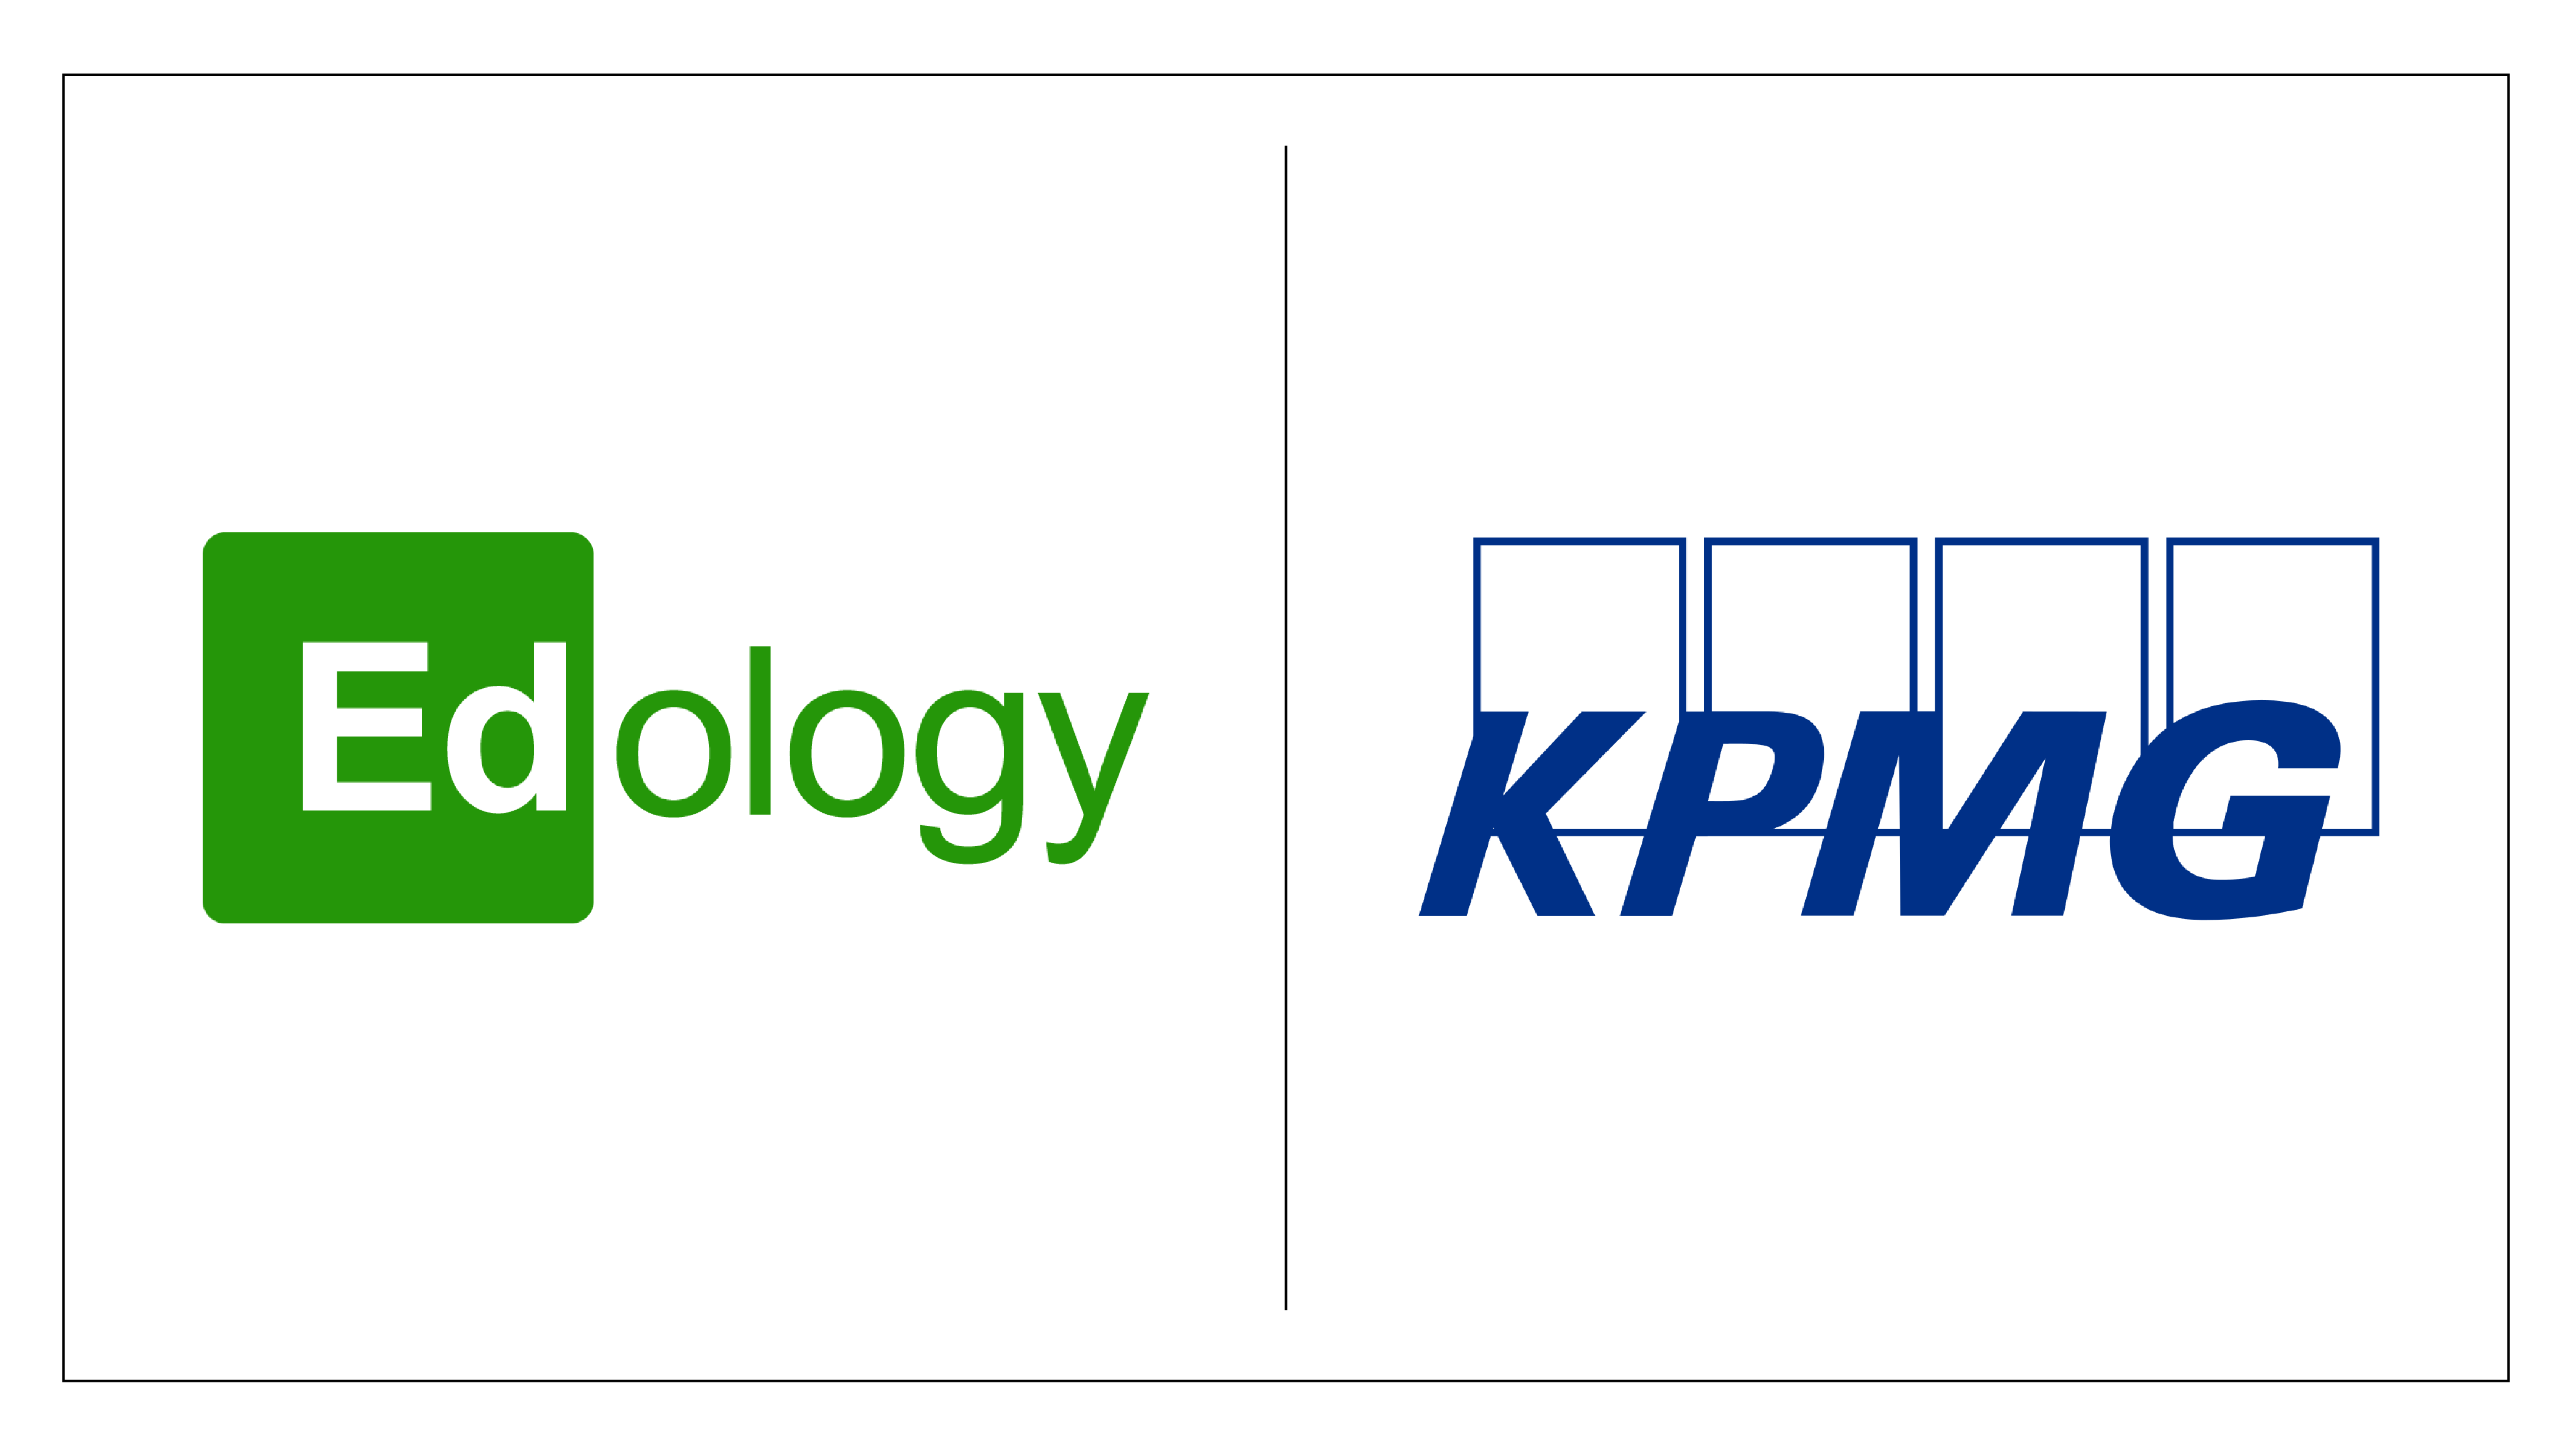 Edology Partners with KPMG India - Introduces a 10-month Futuristic Course in Technology Management